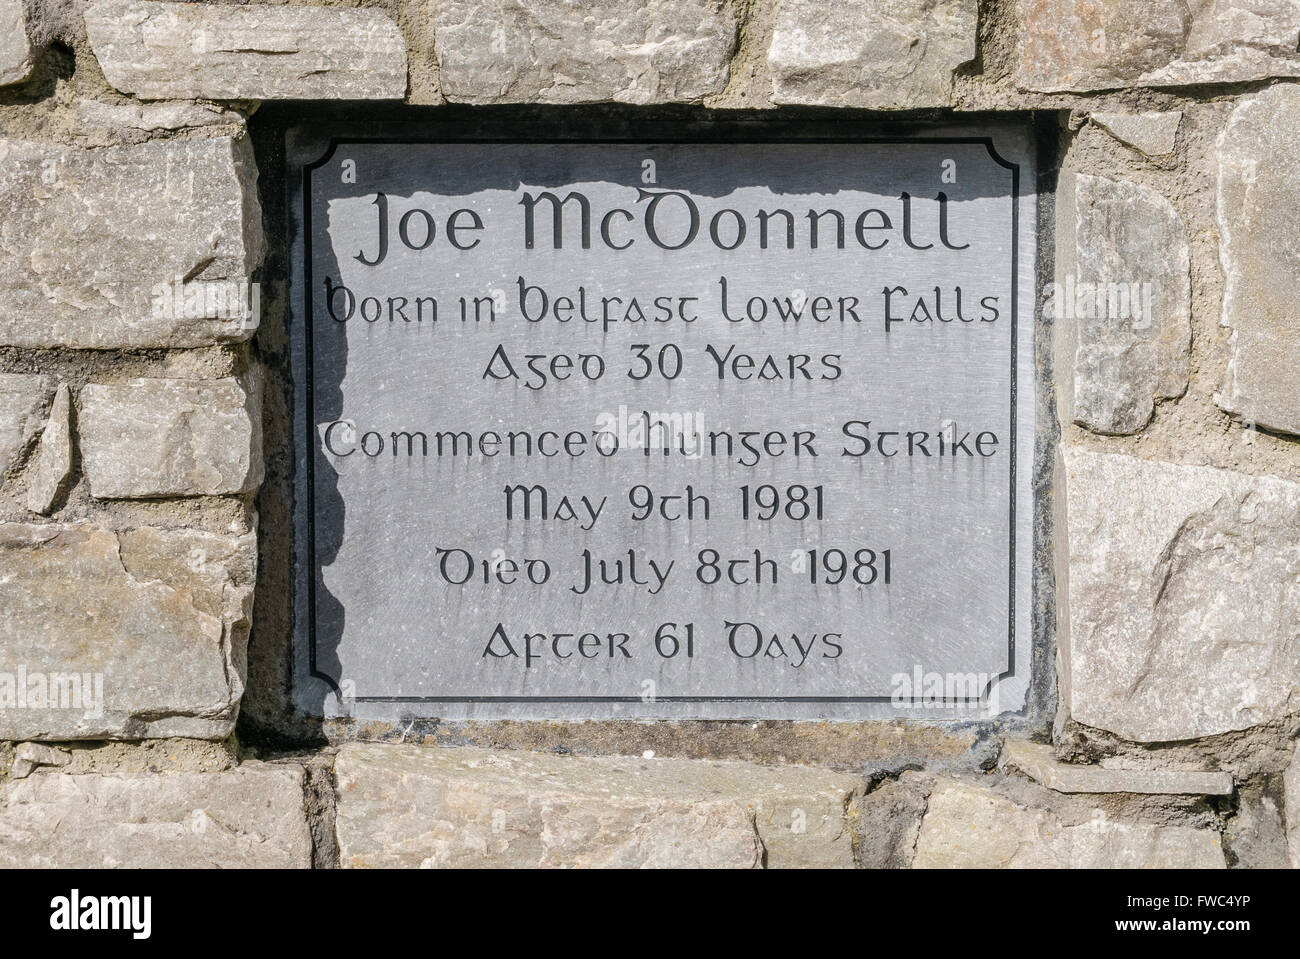 Memorial plaque in a garden of remembrance for the 1981 Irish Republican hunger striker Joe McDonnell Stock Photo